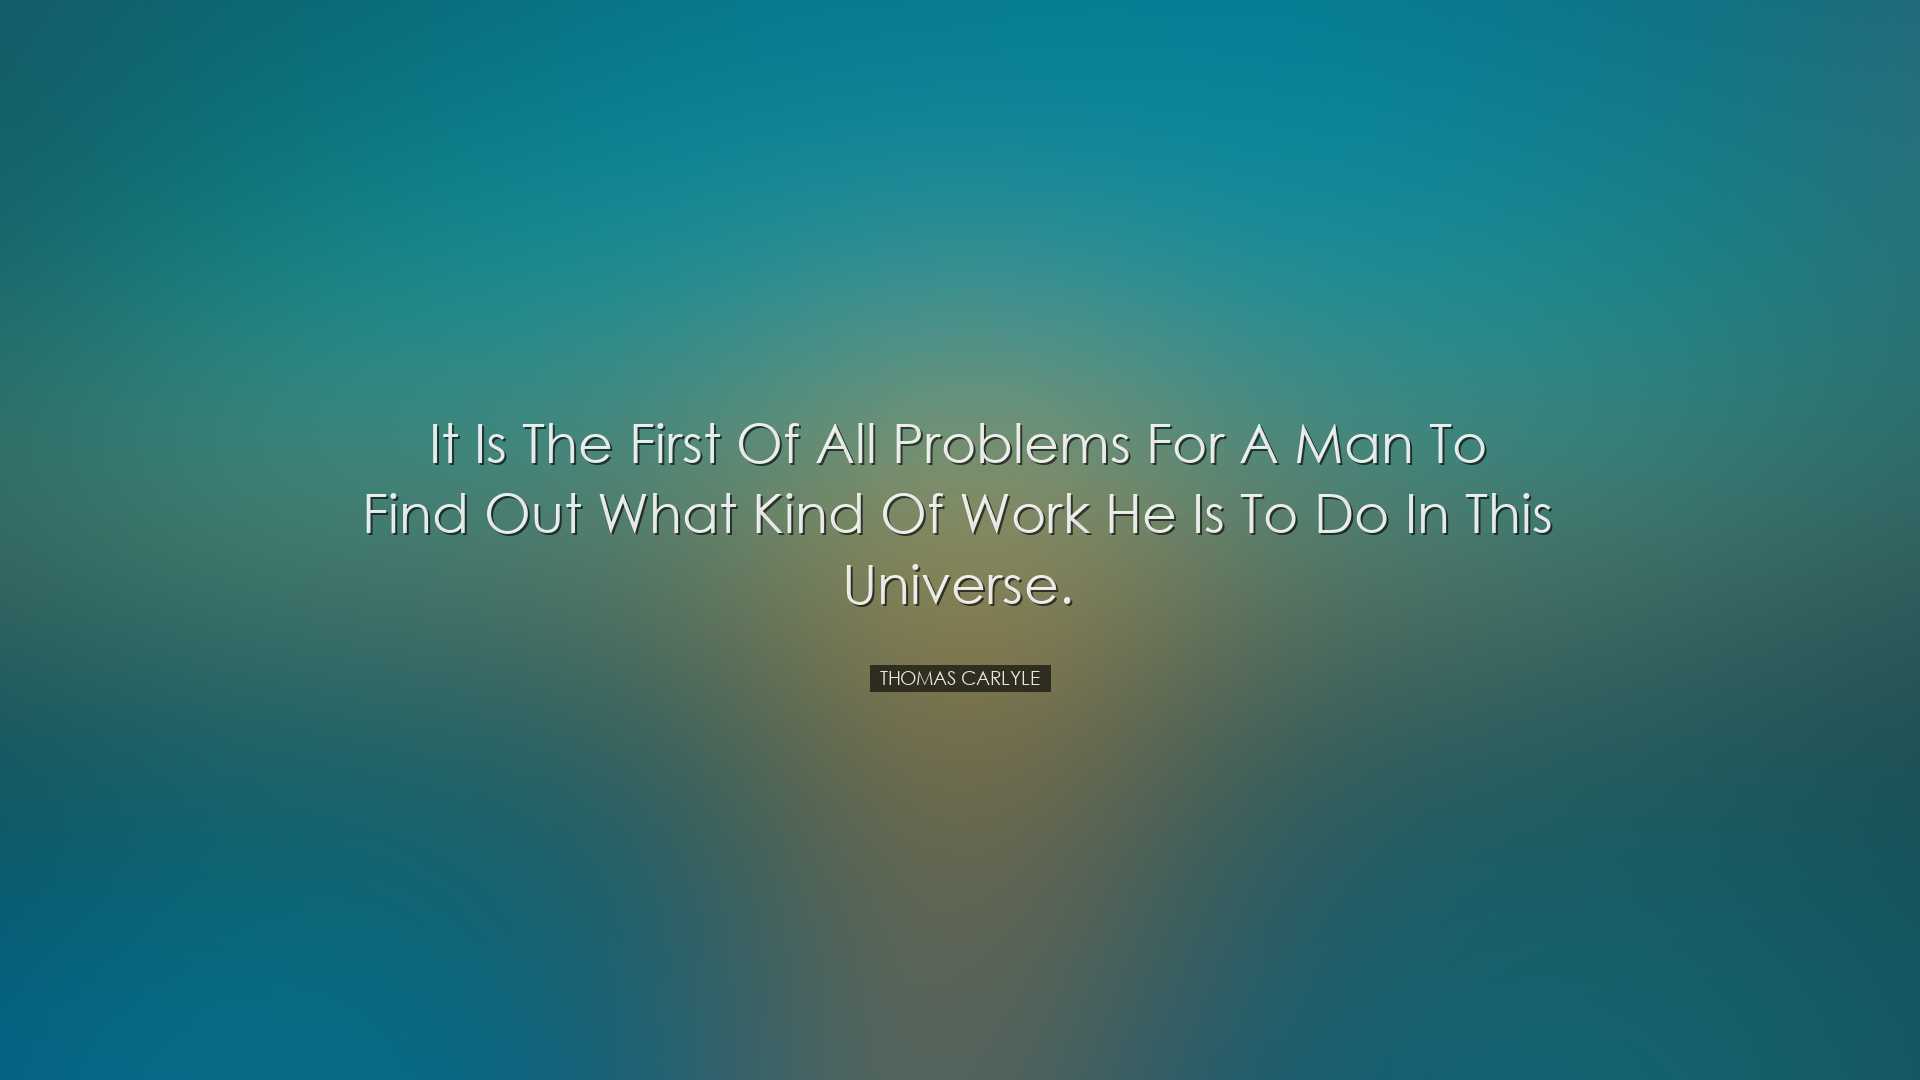 It is the first of all problems for a man to find out what kind of